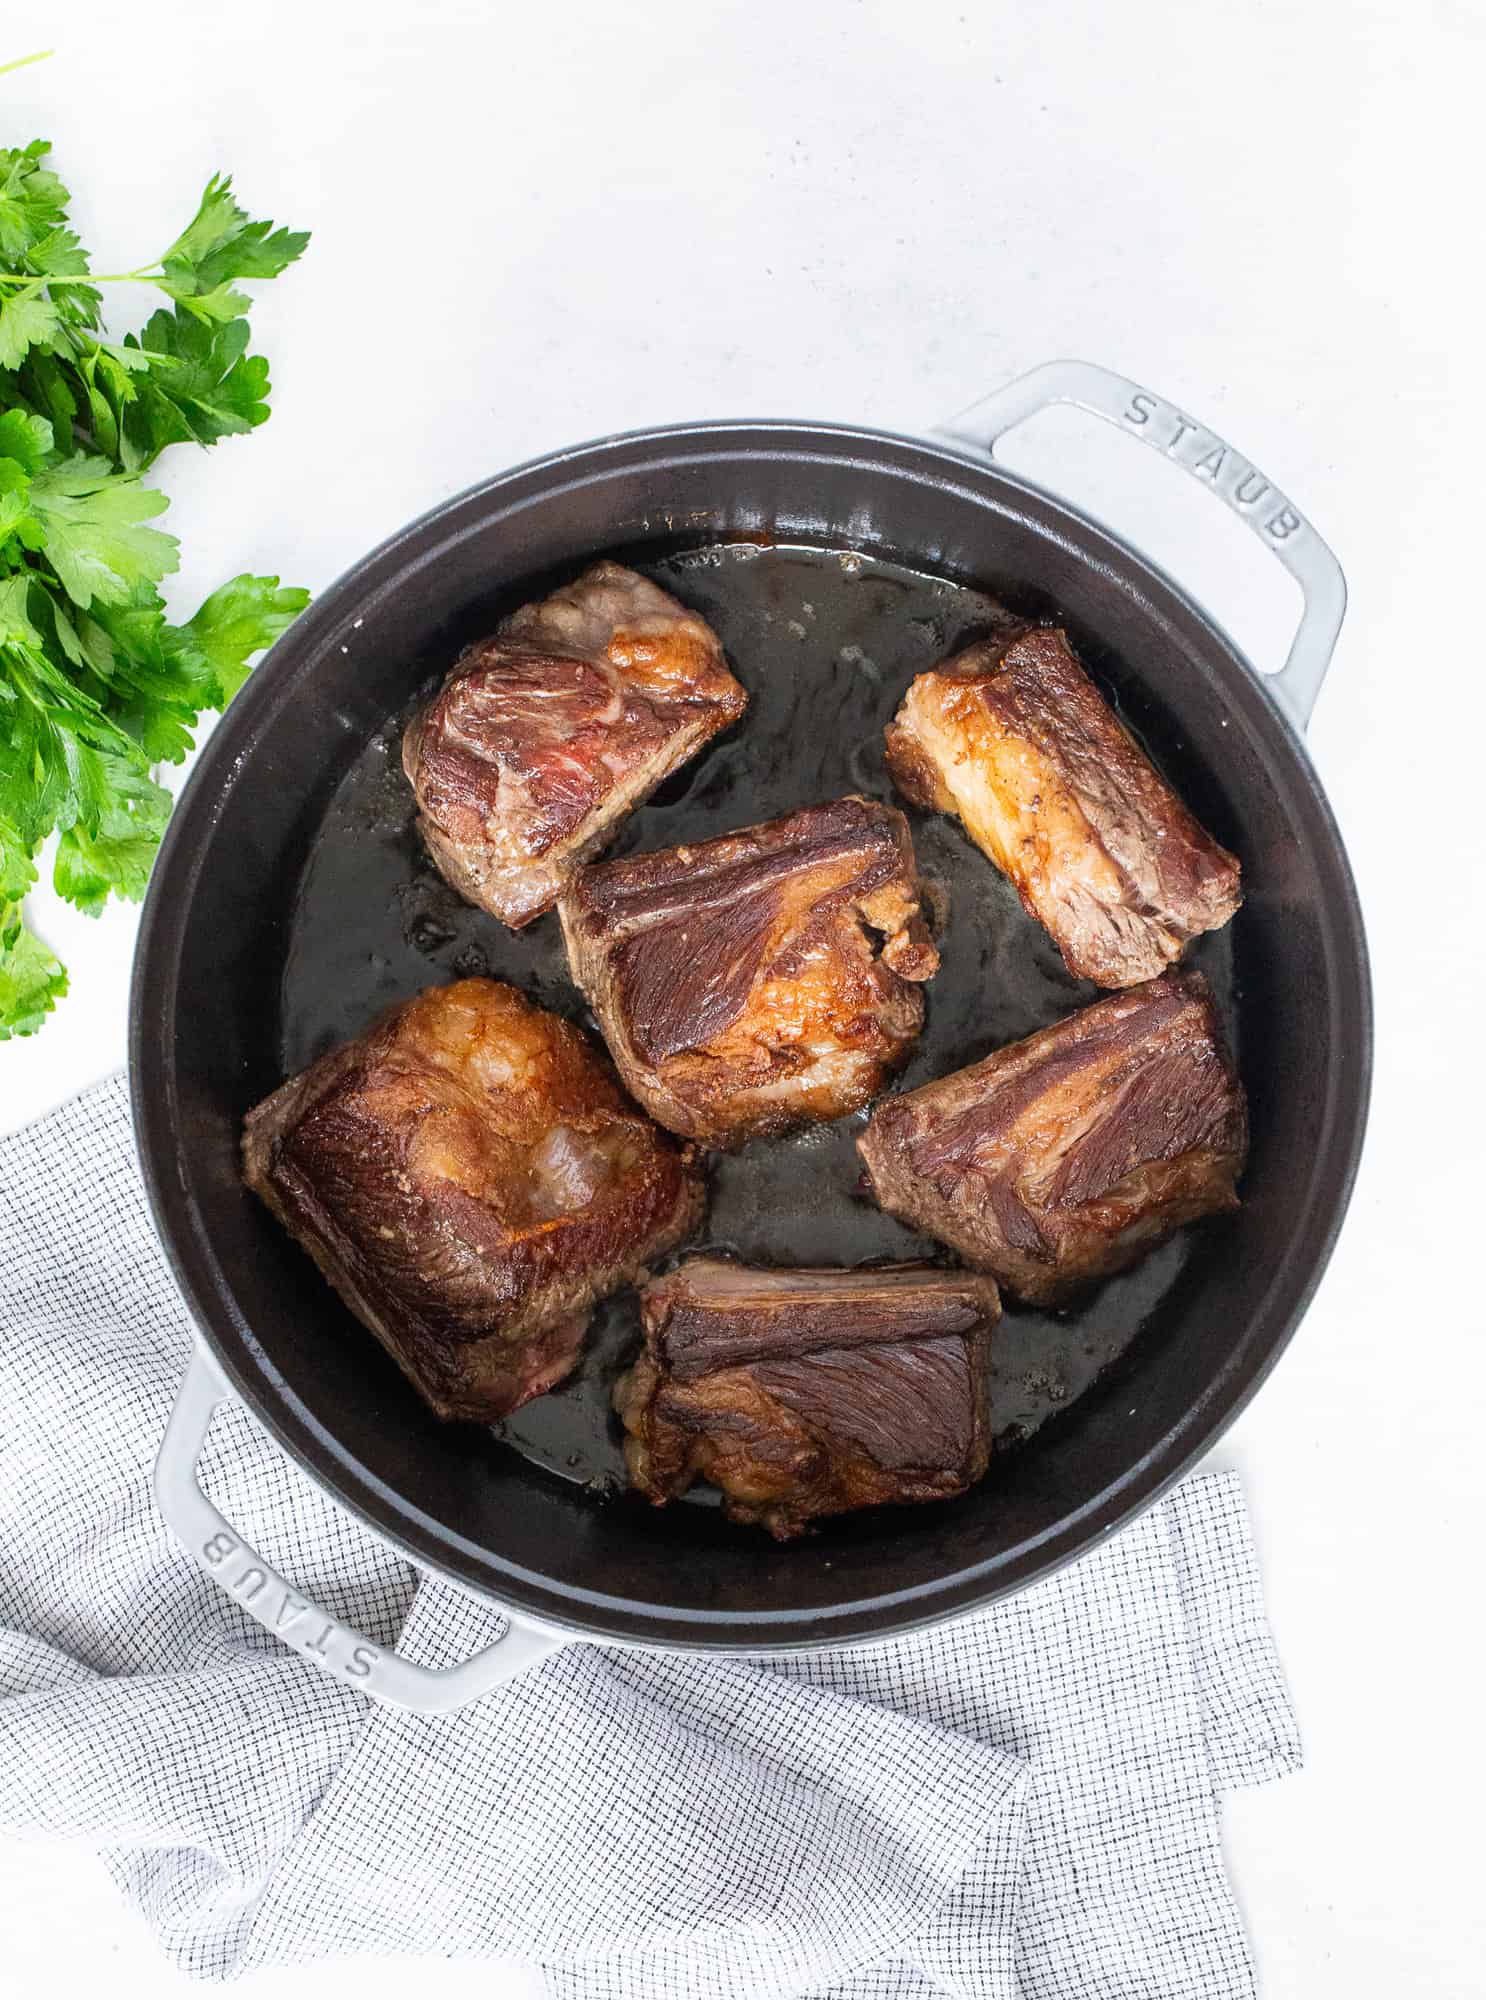 Browned ribs in a Dutch oven pan.